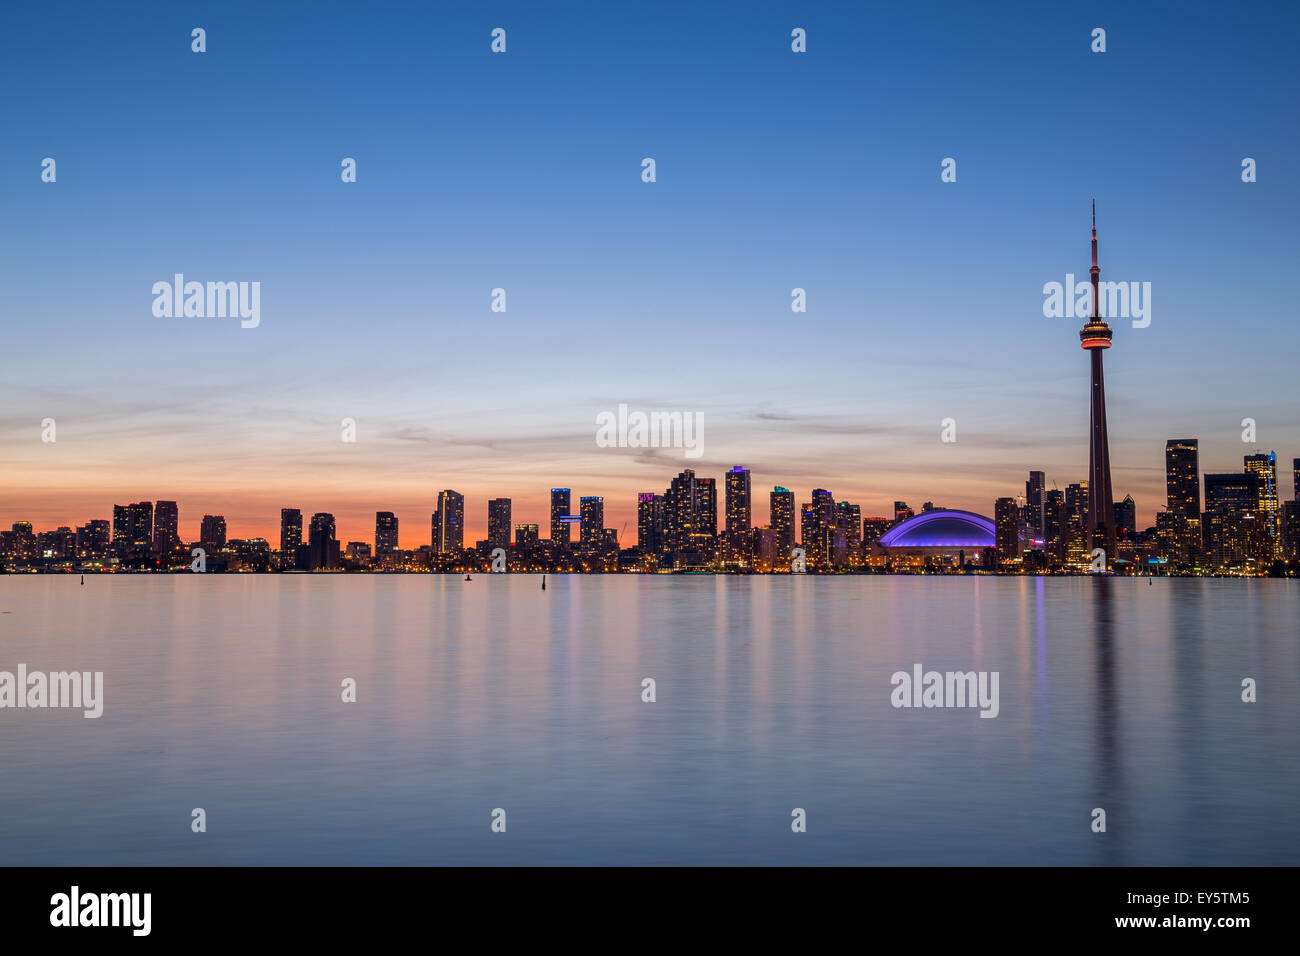 A view of buildings West of Downtown at dusk from Lake Ontario with copy space above or below the buildings Stock Photo